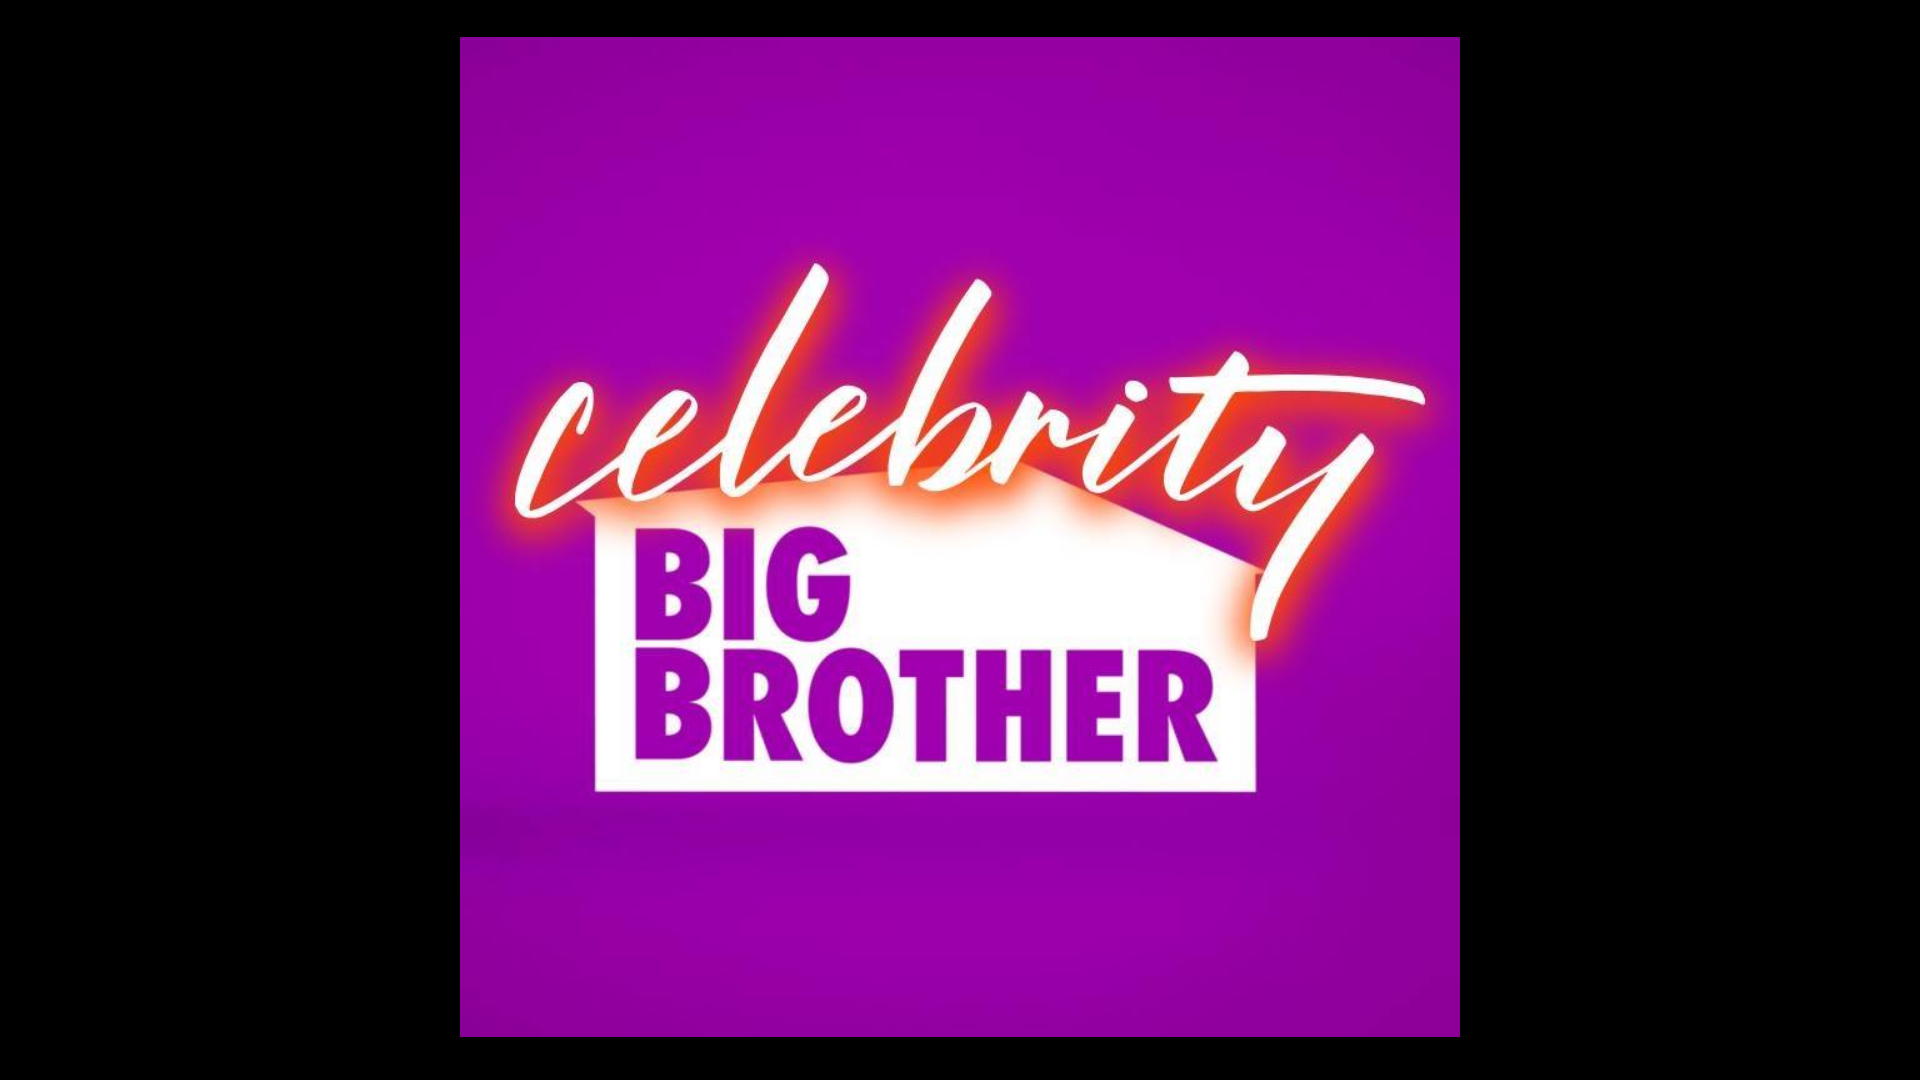 Celebrity Big Brother 2018 Cast Revealed Meet the Houseguests!